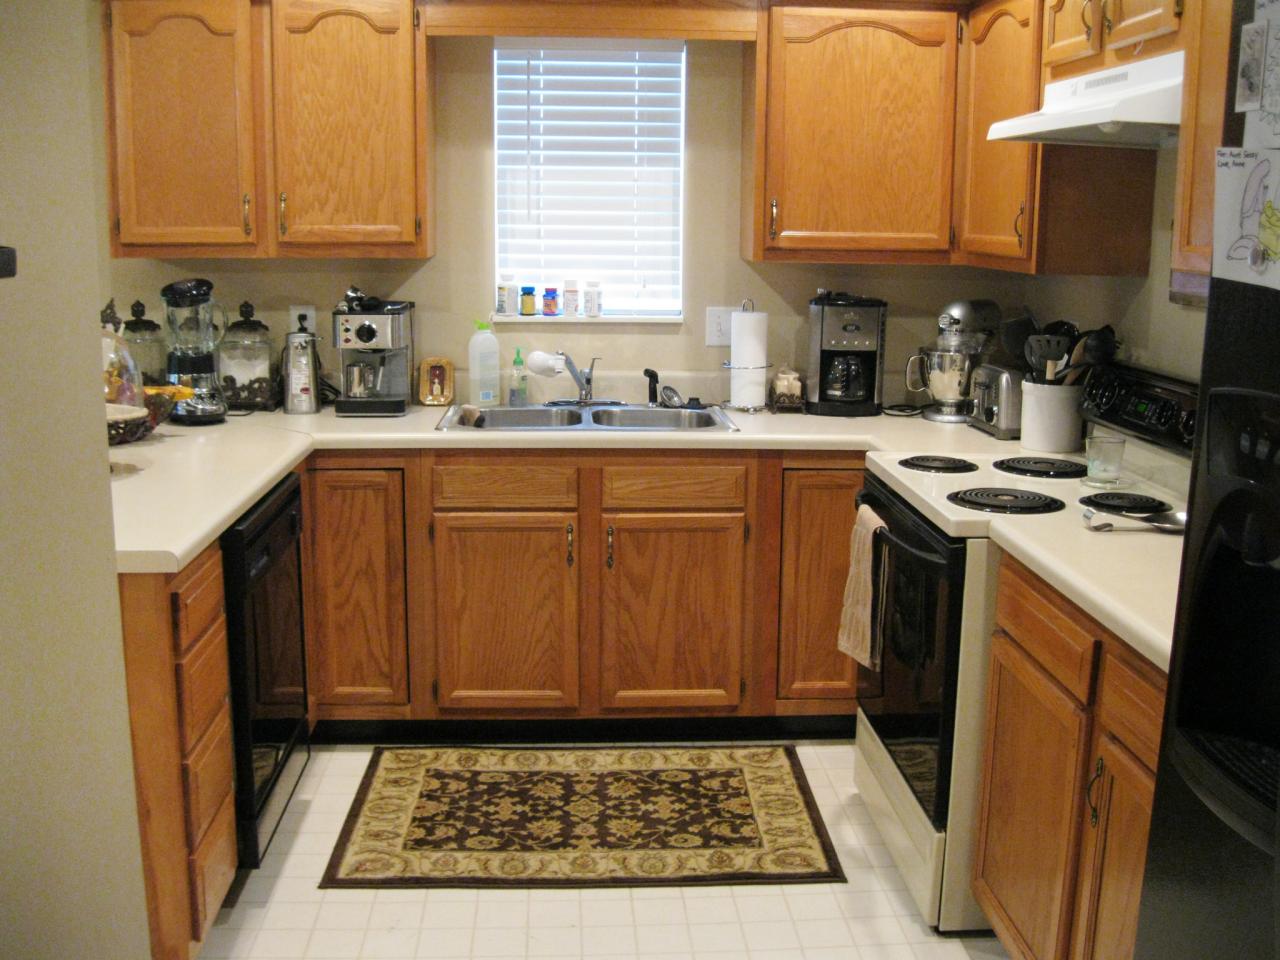 Replacing Kitchen Cabinets Pictures, When Should Kitchen Cabinets Be Replaced